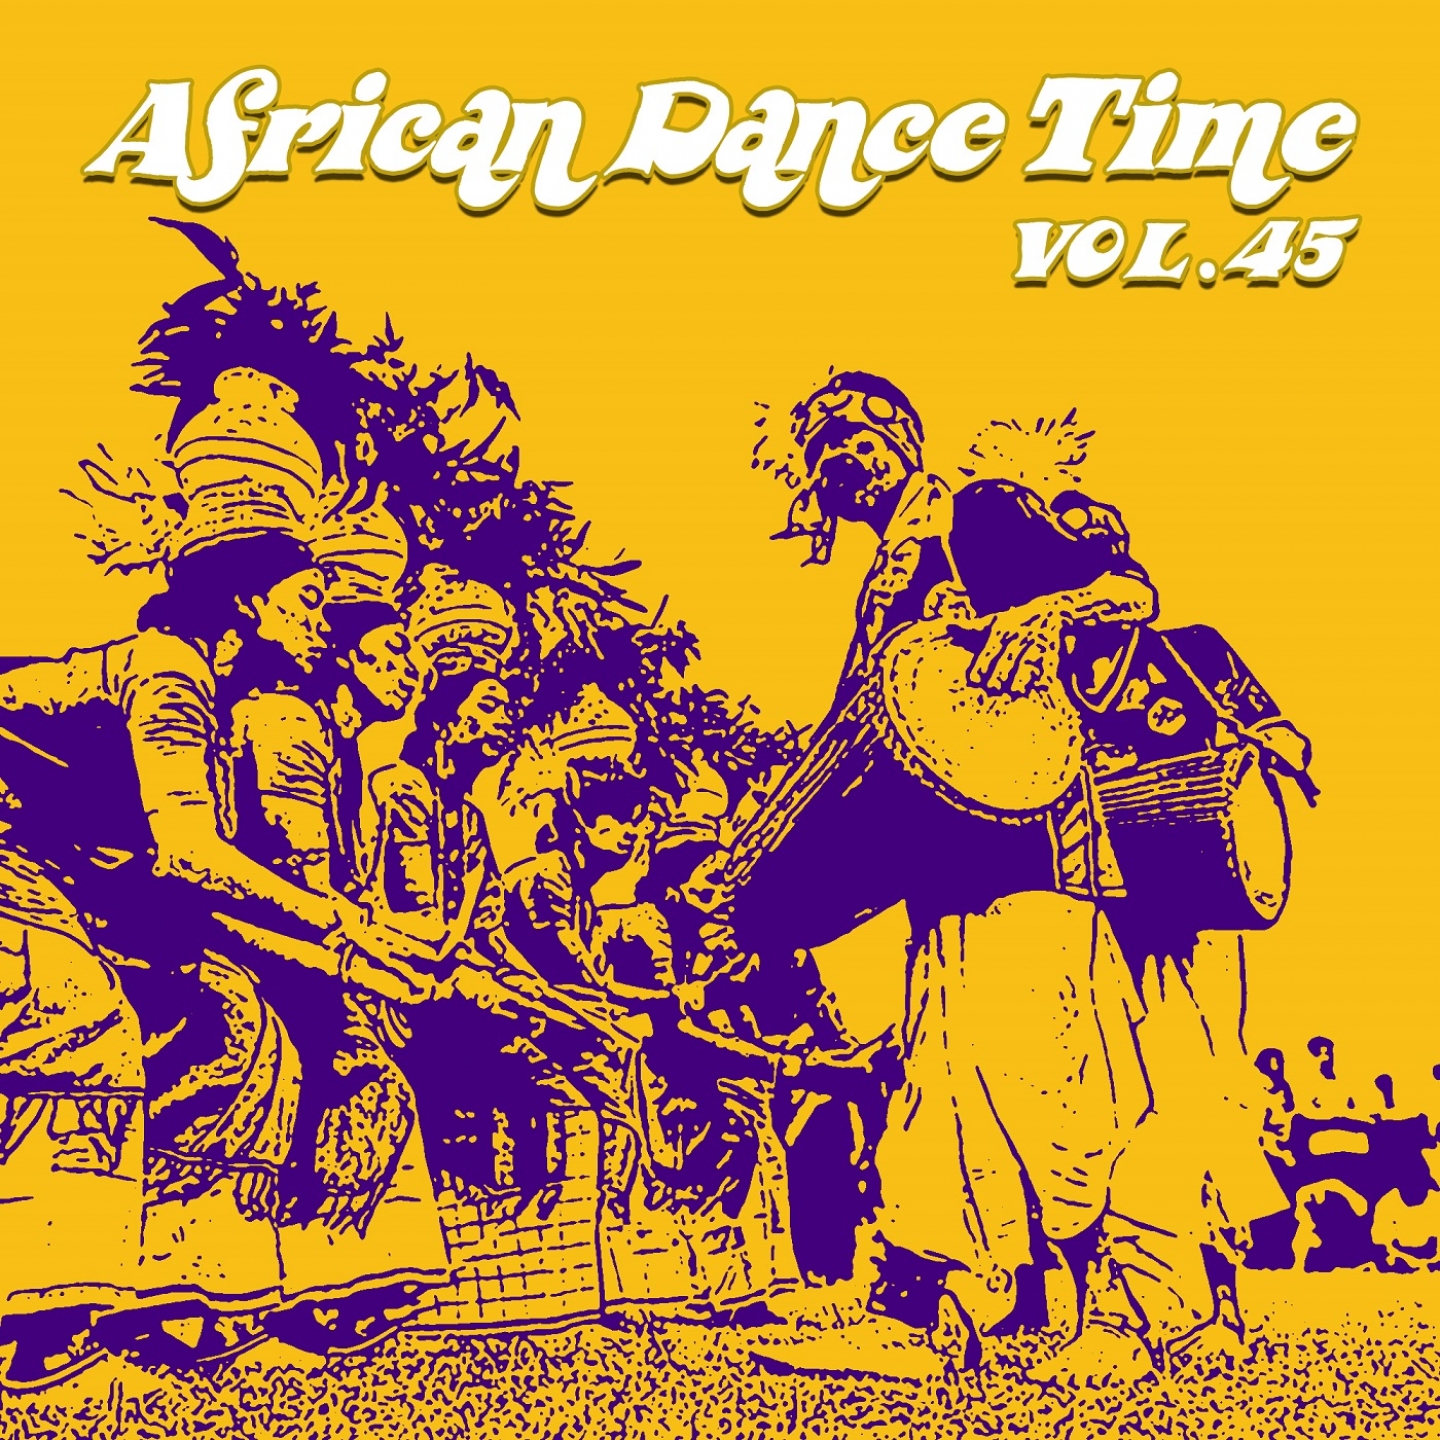 African Dance Time, Vol.45